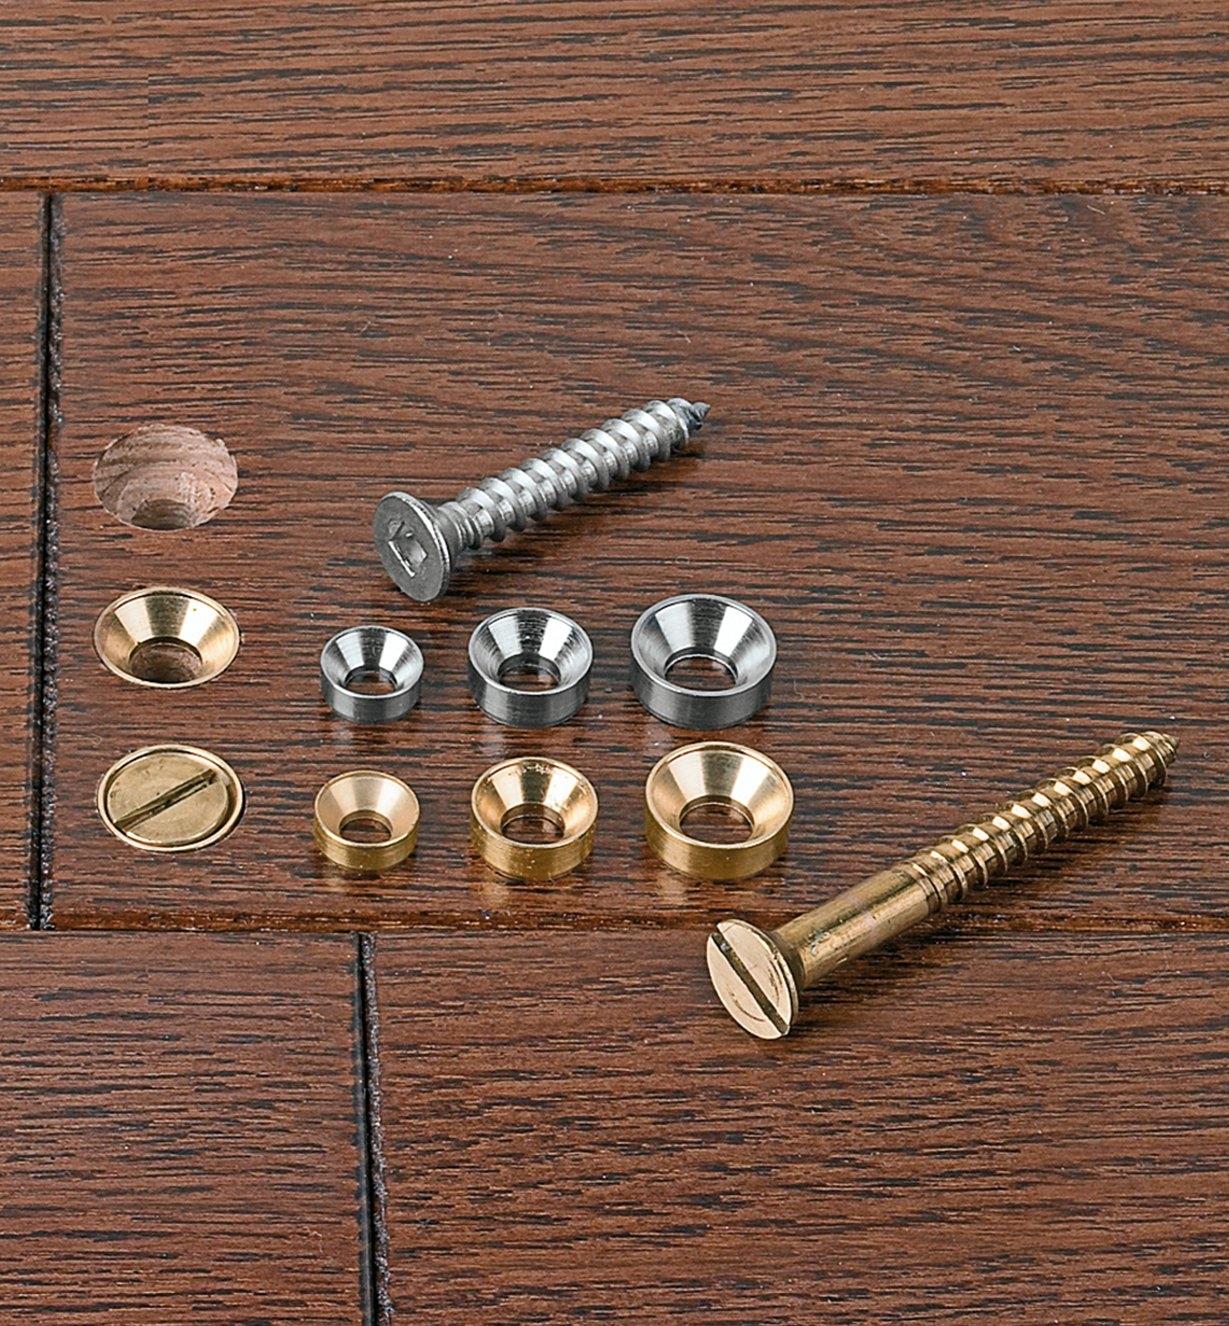 Examples of Countersunk Washers installed in wood